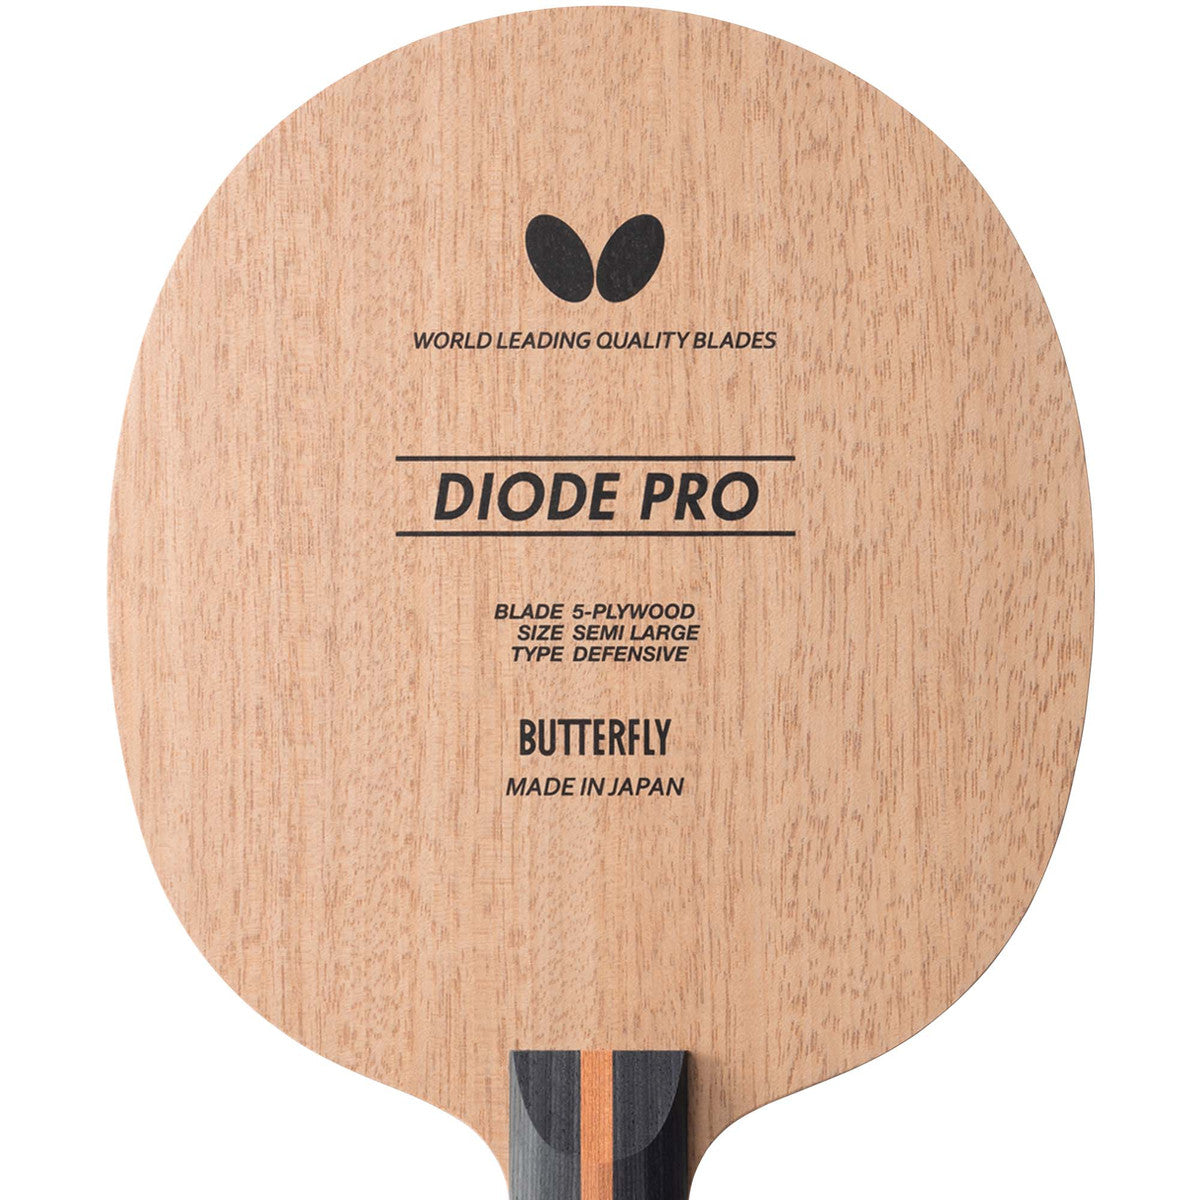 Butterfly Diode Pro Blade